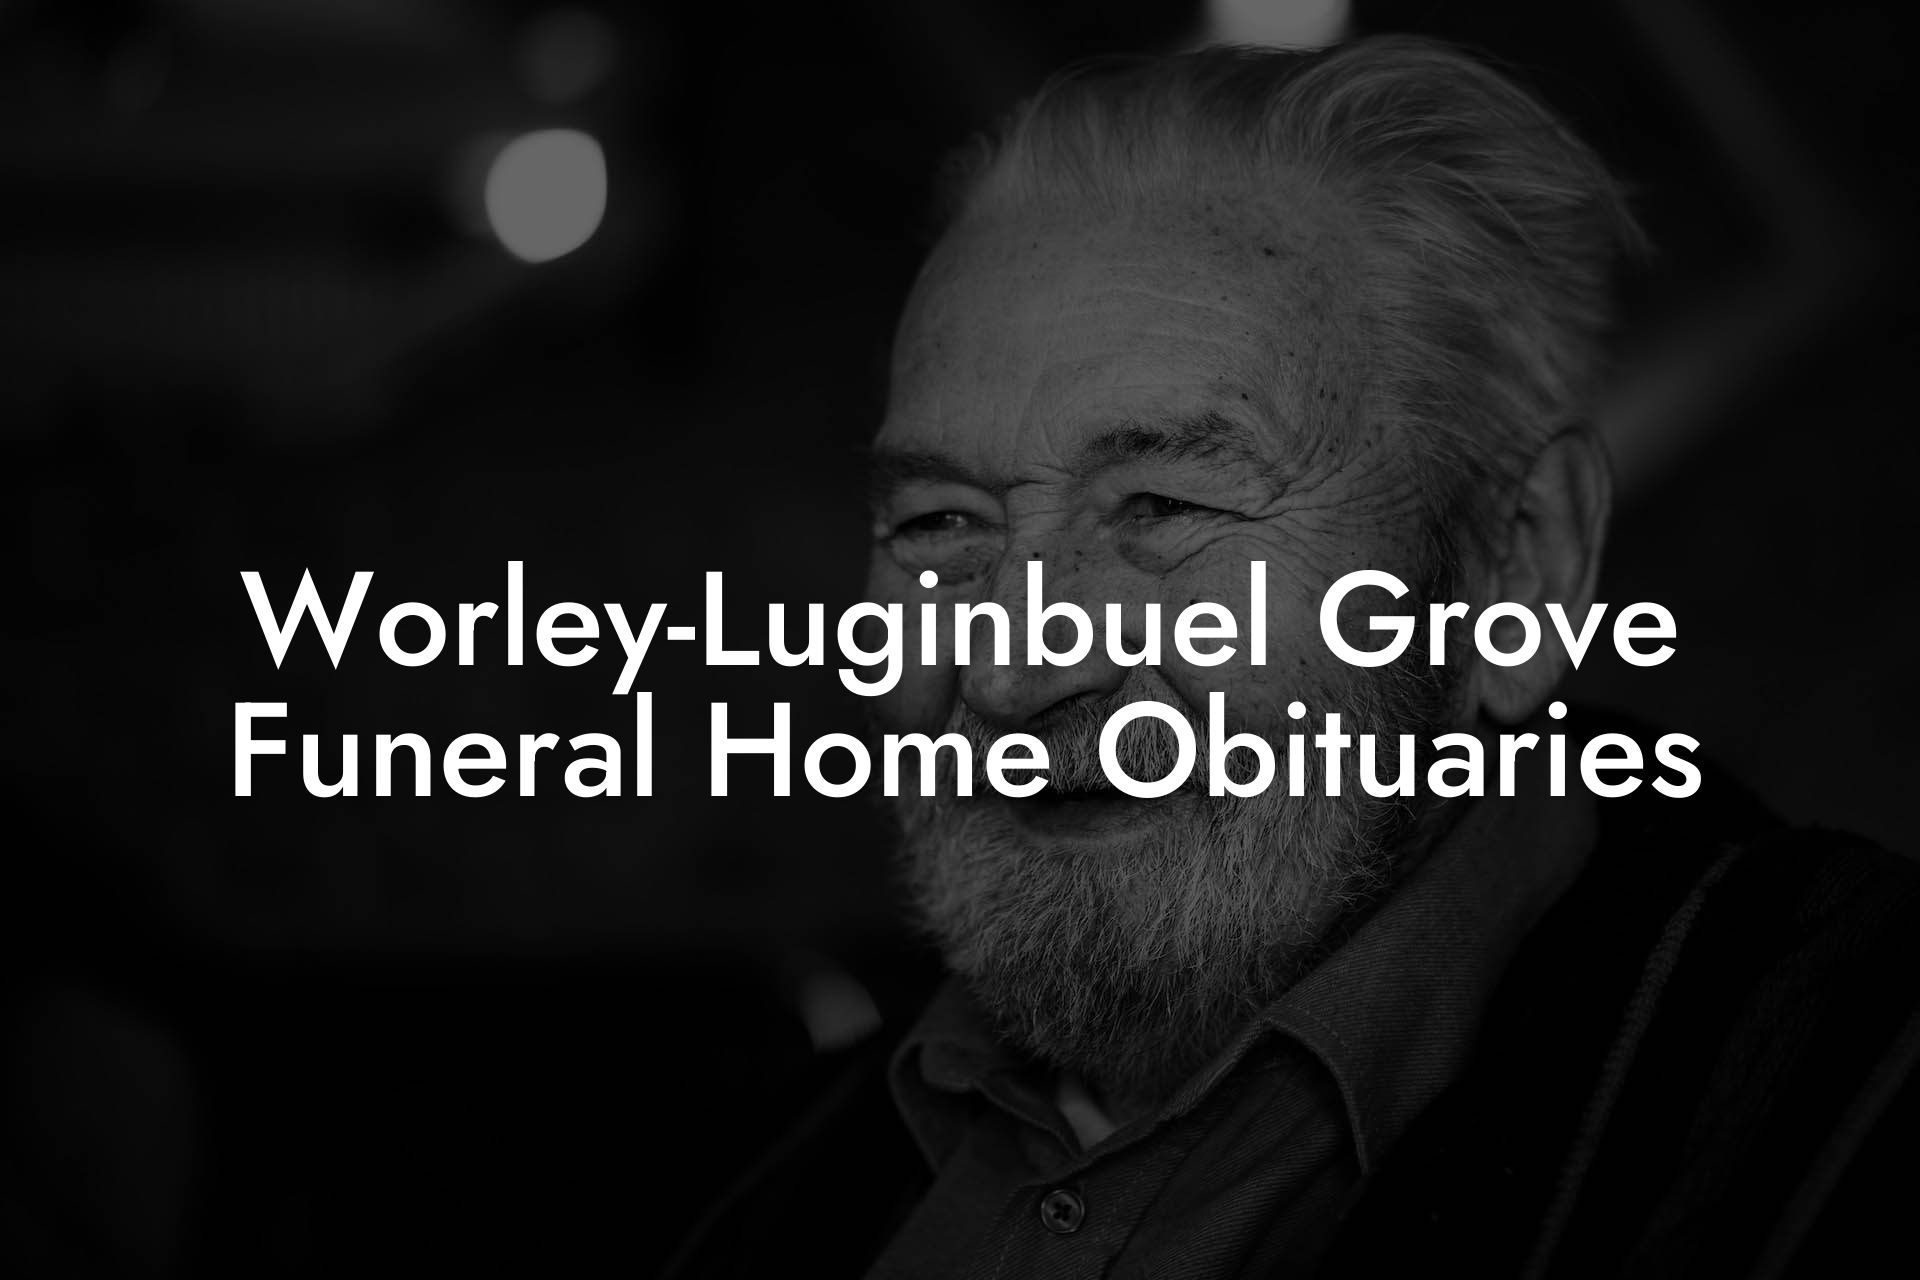 Worley-Luginbuel Grove Funeral Home Obituaries